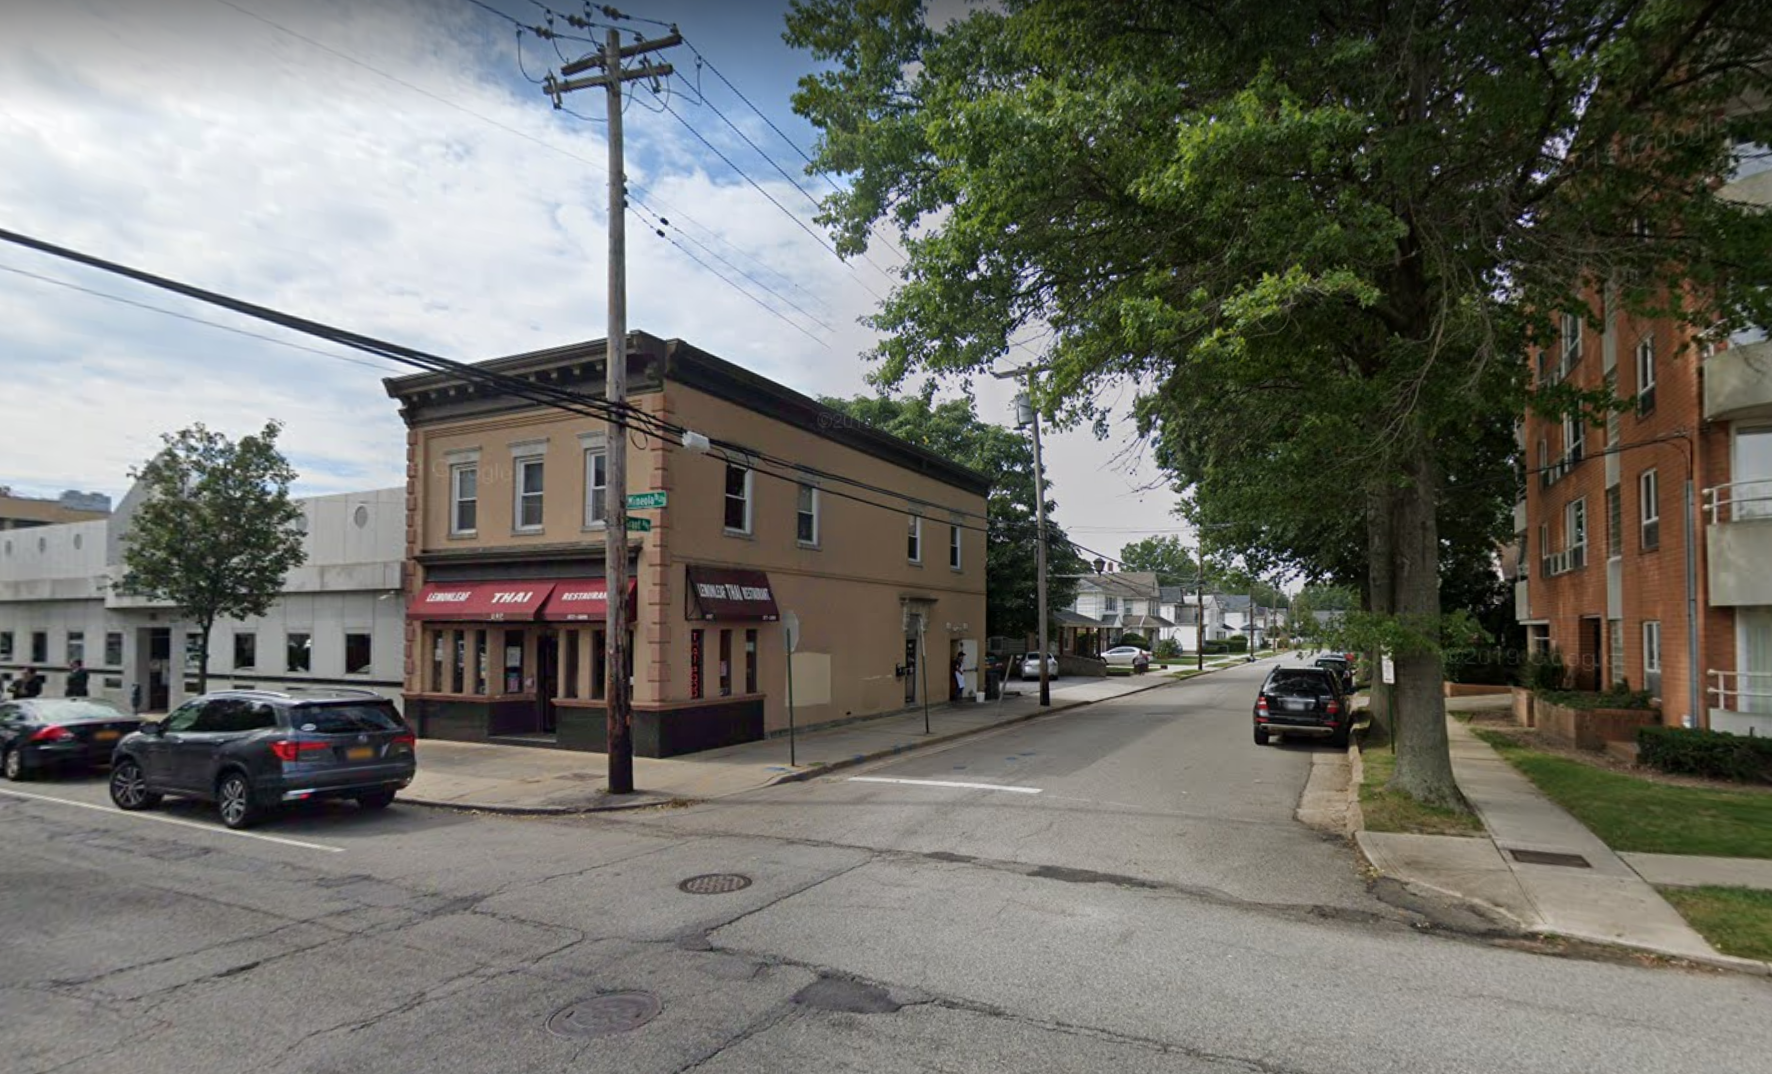 Police said they found Gerzon Hernandez "acting irate" at the corner of Grant Avenue and Mineola Boulevard in Mineola. (Image from Google Maps)